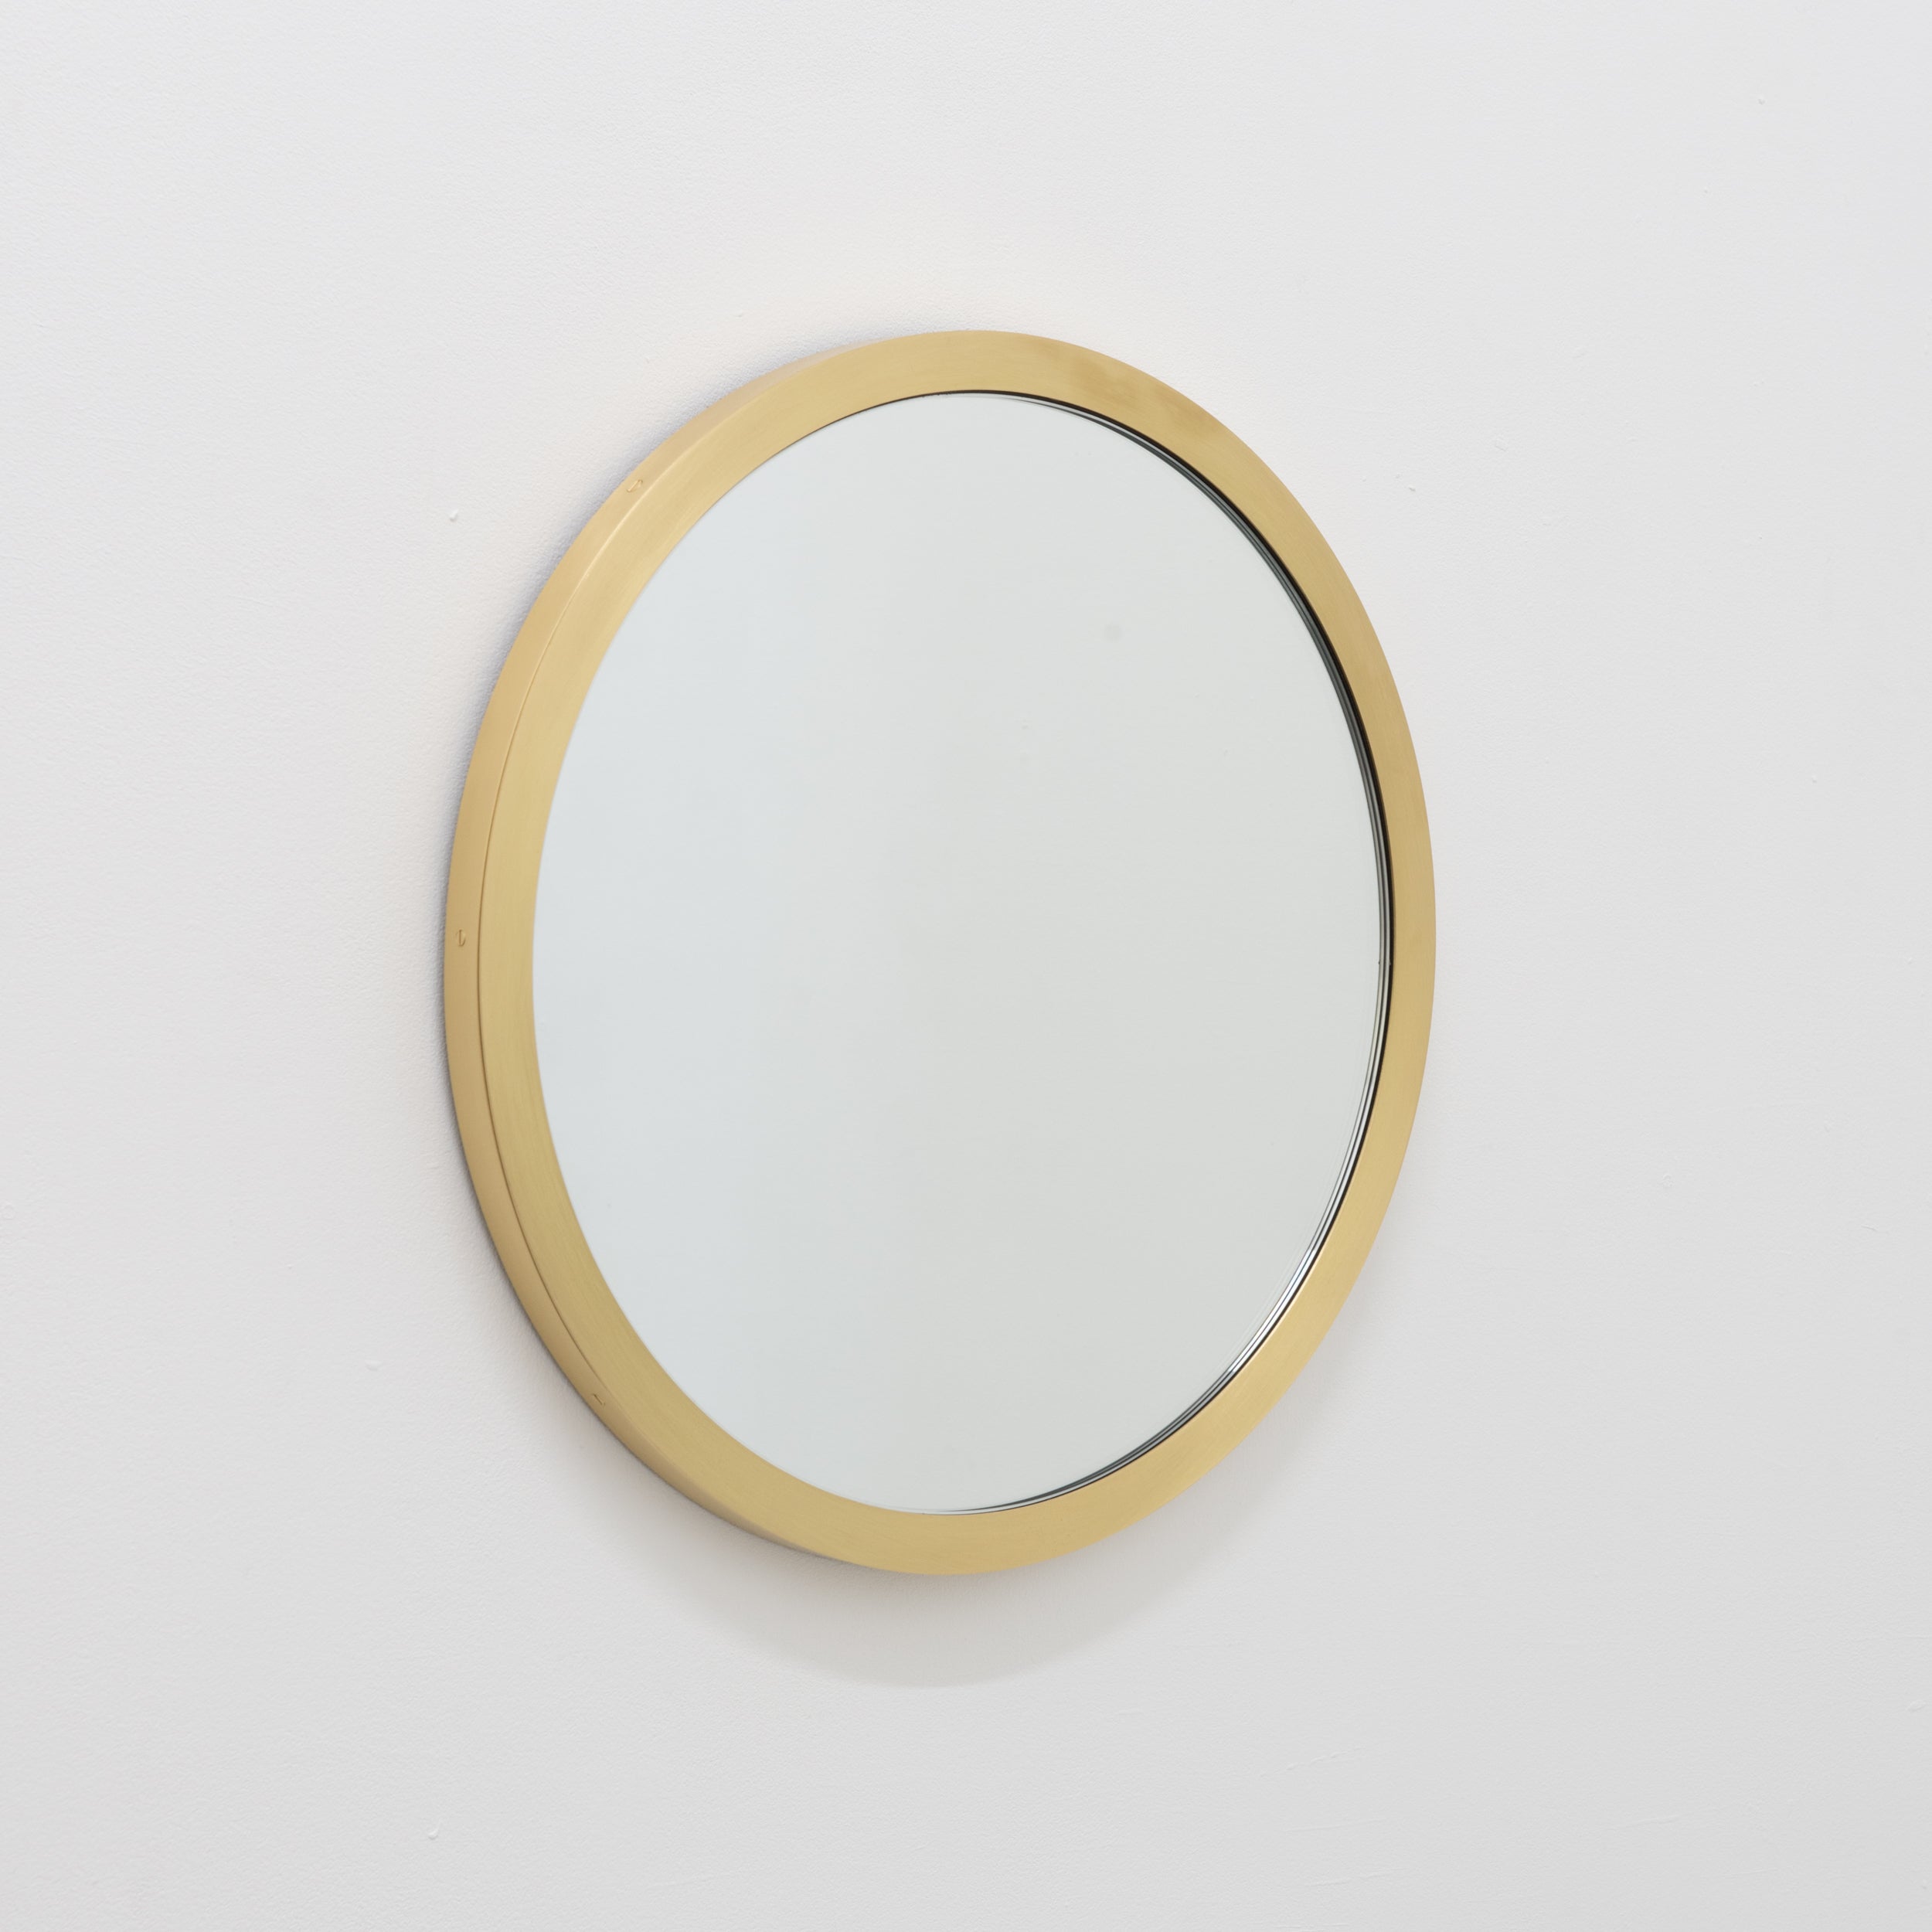 Our brand new 'Full Frame' design maintains the chic and elegant style of Alguacil & Perkoff' signature 'Minimalist Frame' mirrors, yet placing more emphasis on the solid brass. The designer awards more prominence to this noble material by creating